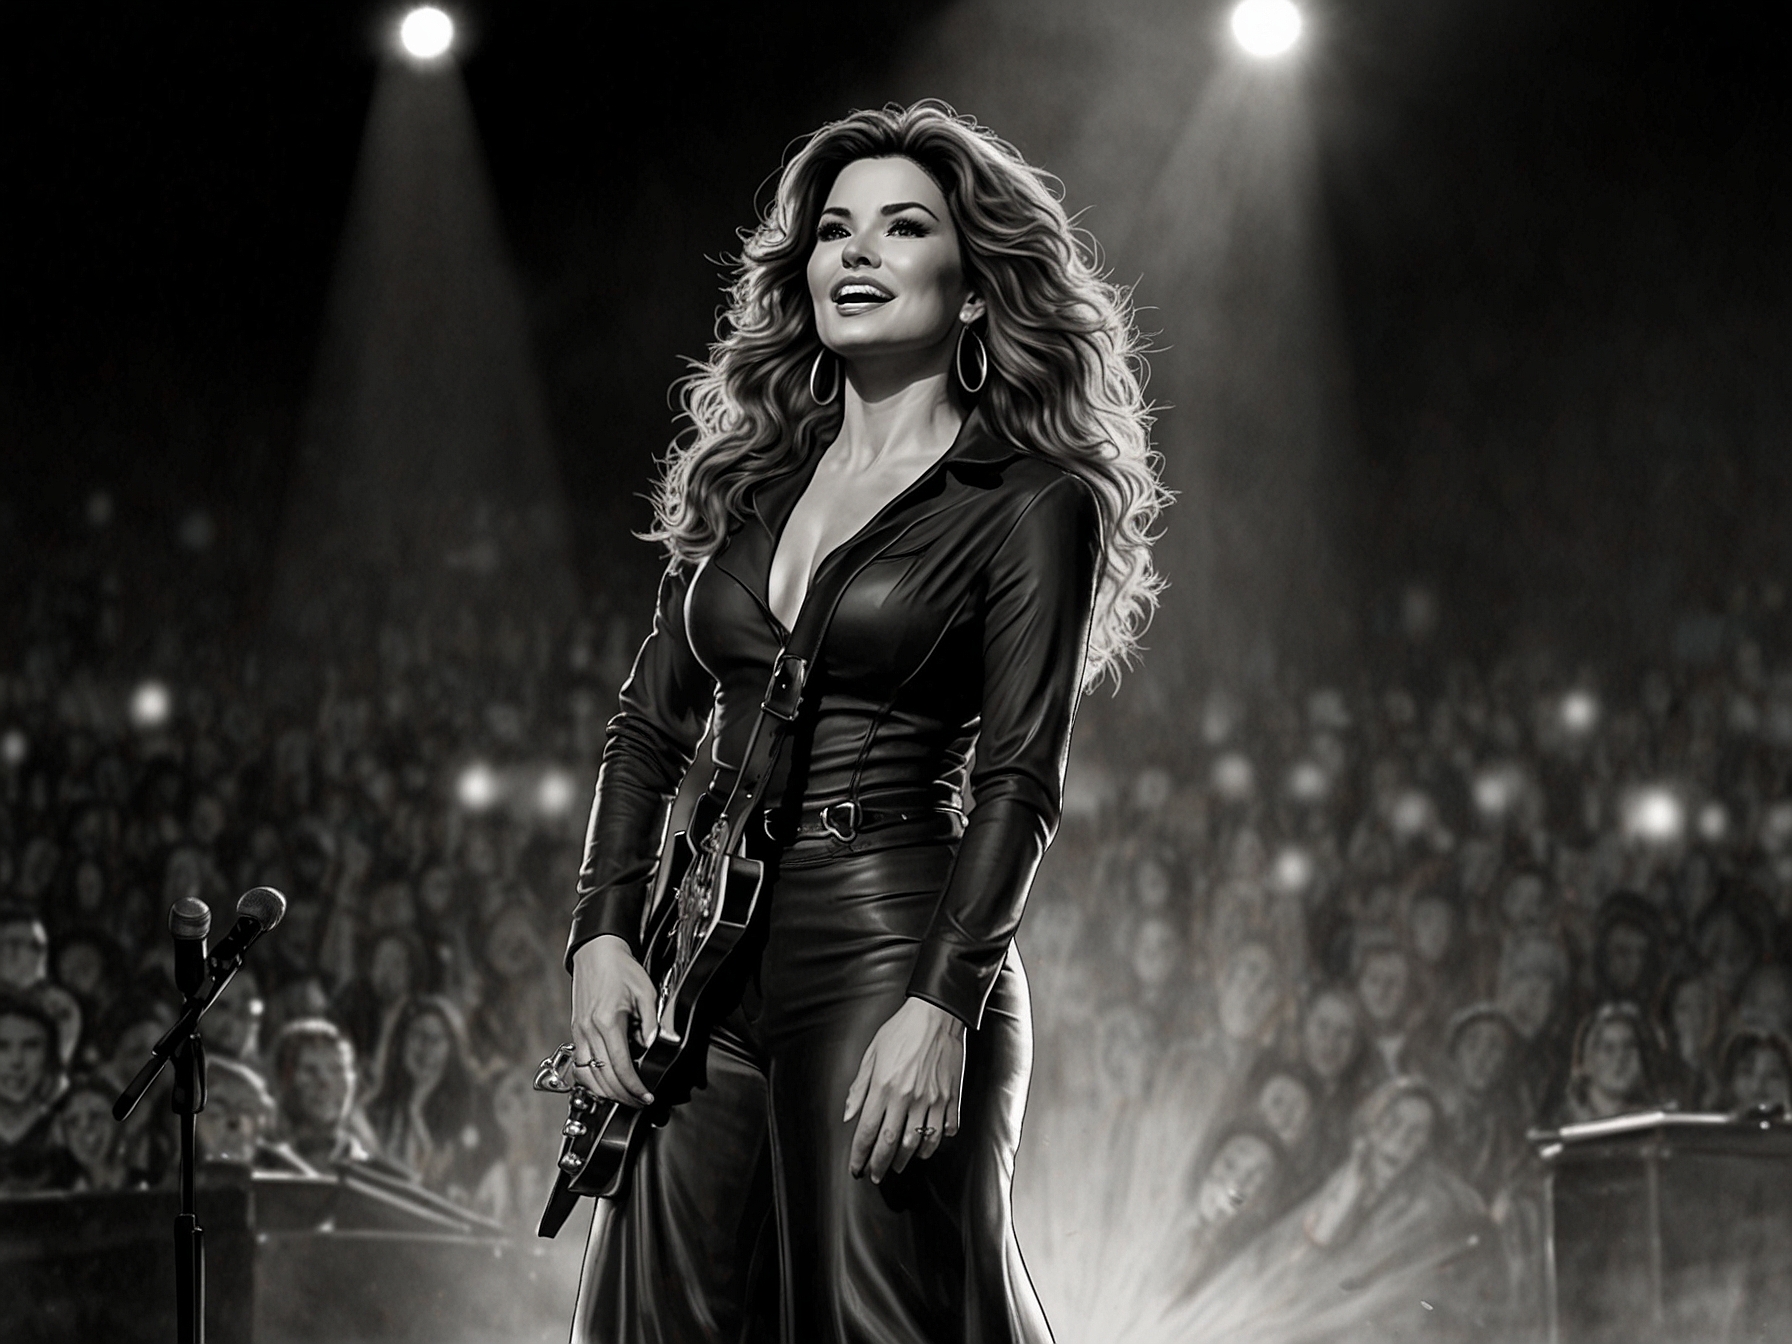 Shania Twain on stage, singing her heart out, illustrating how her personal struggles and resilience inspired her music, connecting deeply with her global audience.